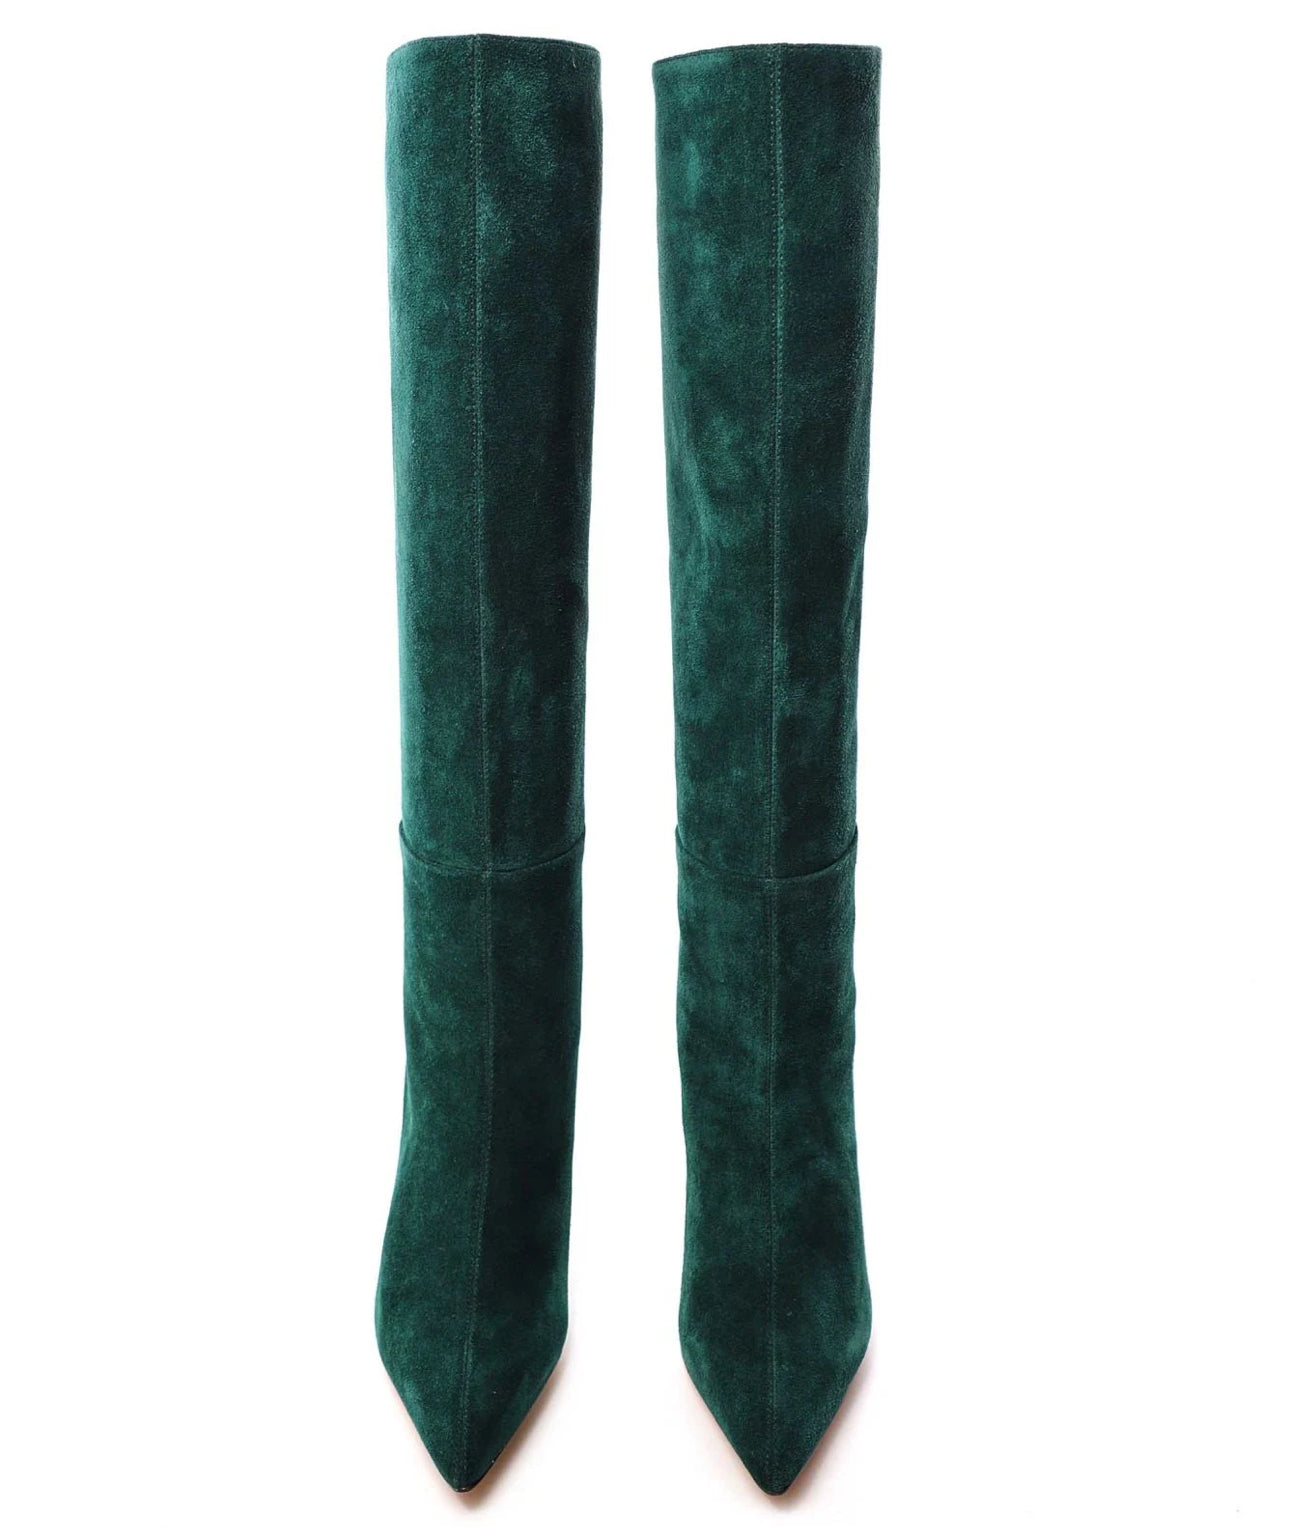 Bodin Emerald Suede is